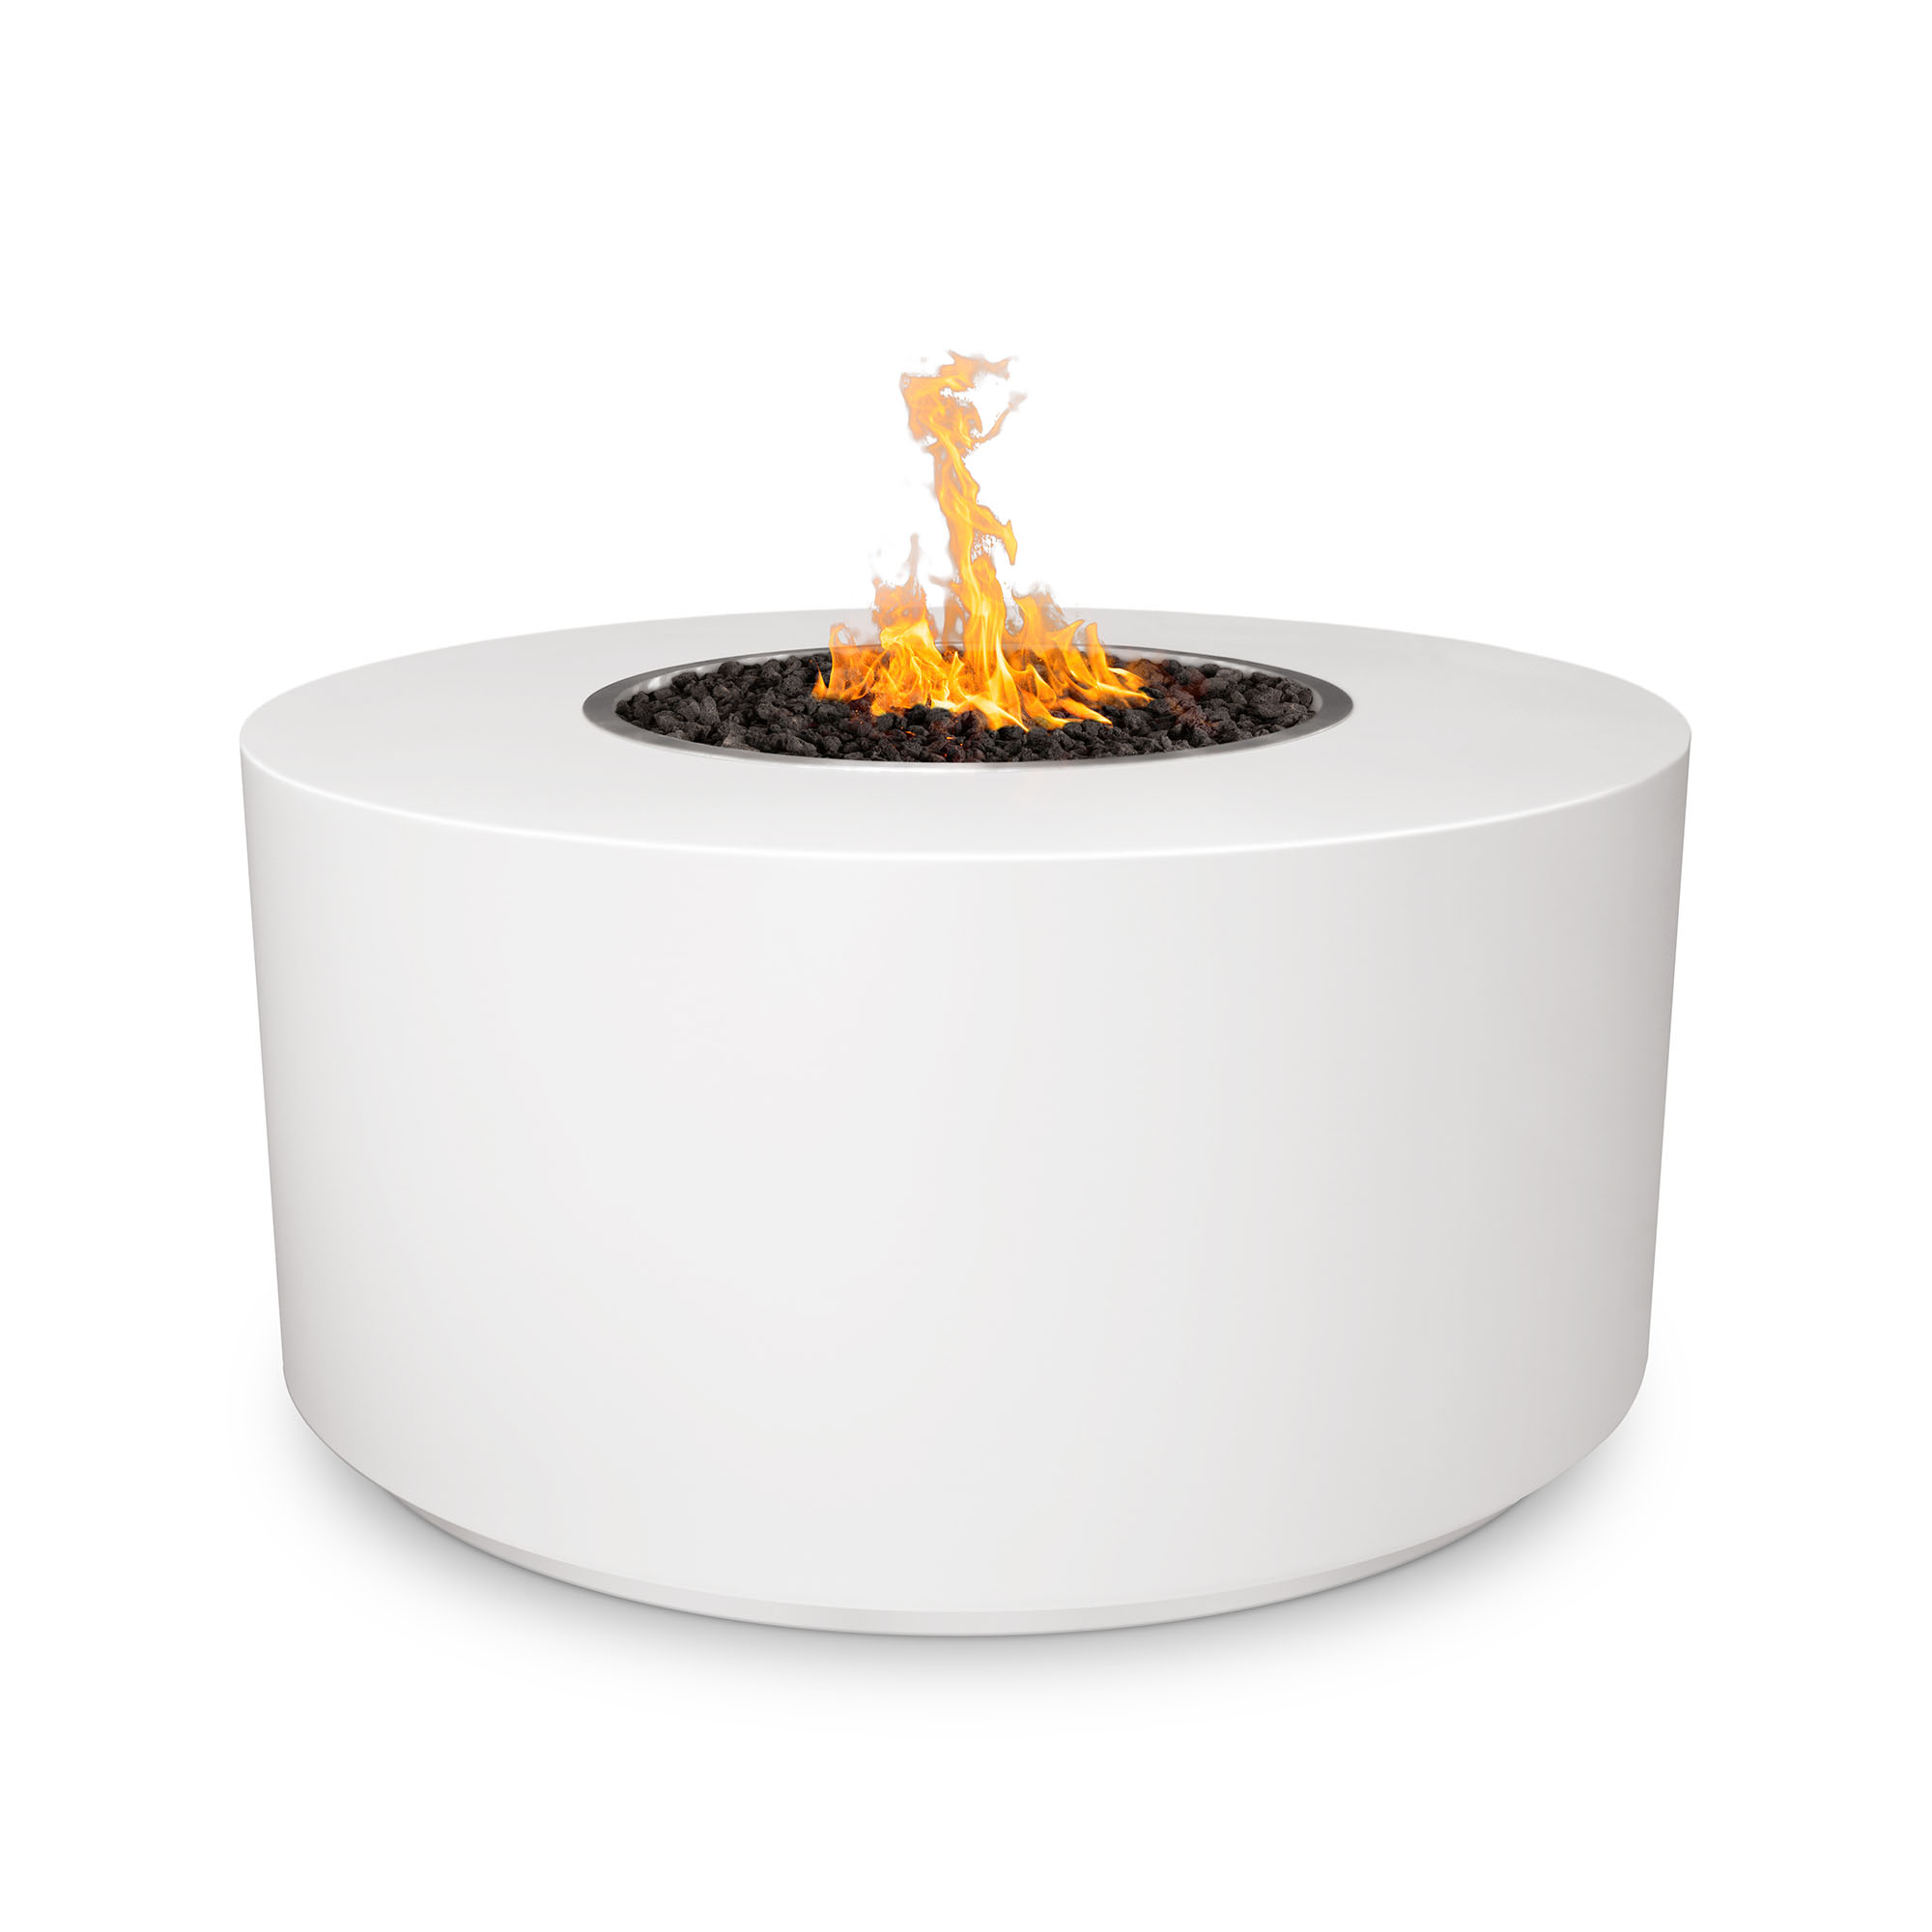 Beverly Fire Pit 42 inch - Powder Coat White